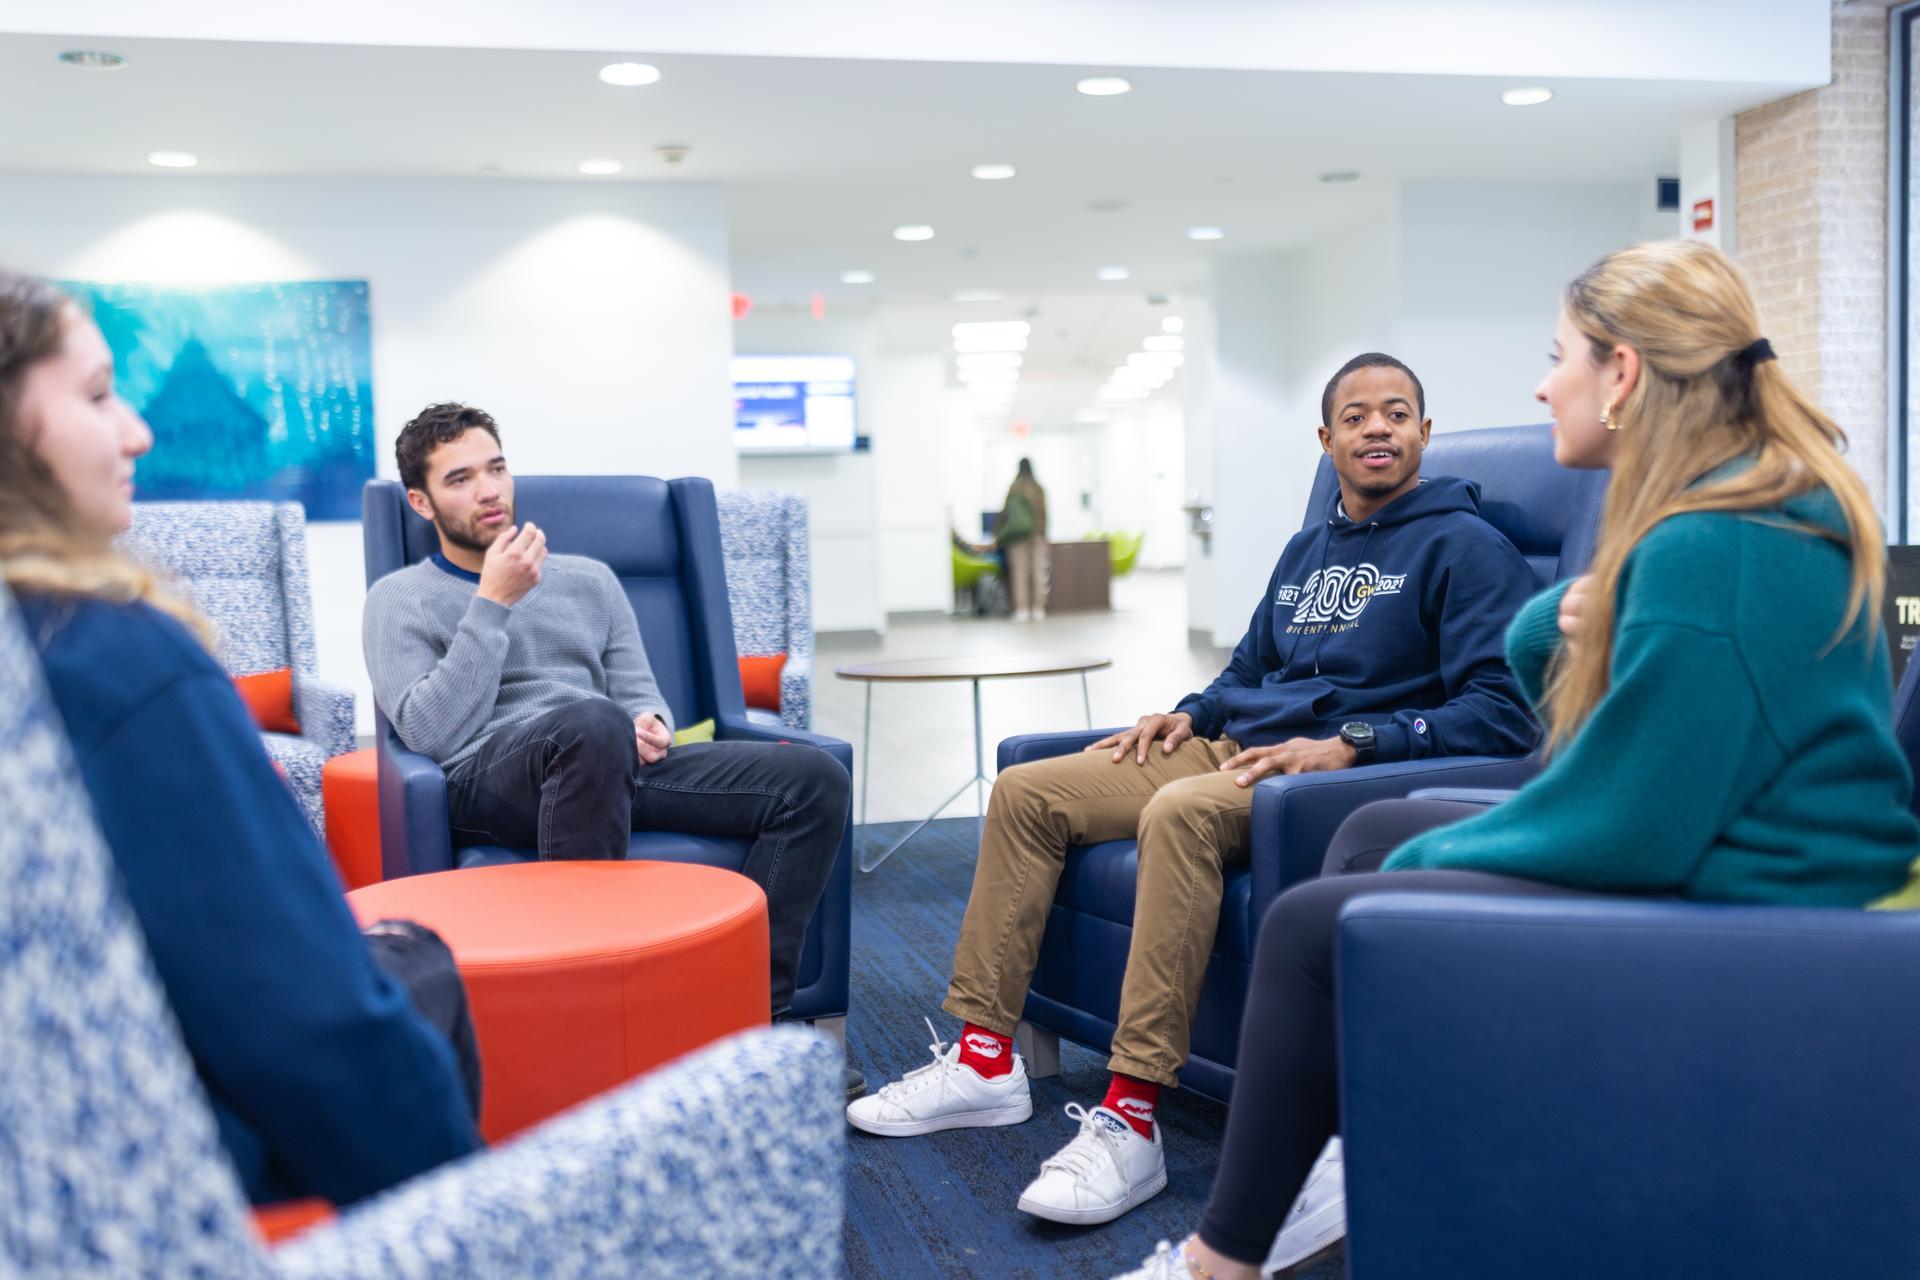 Four students sit talking in the University Student Center